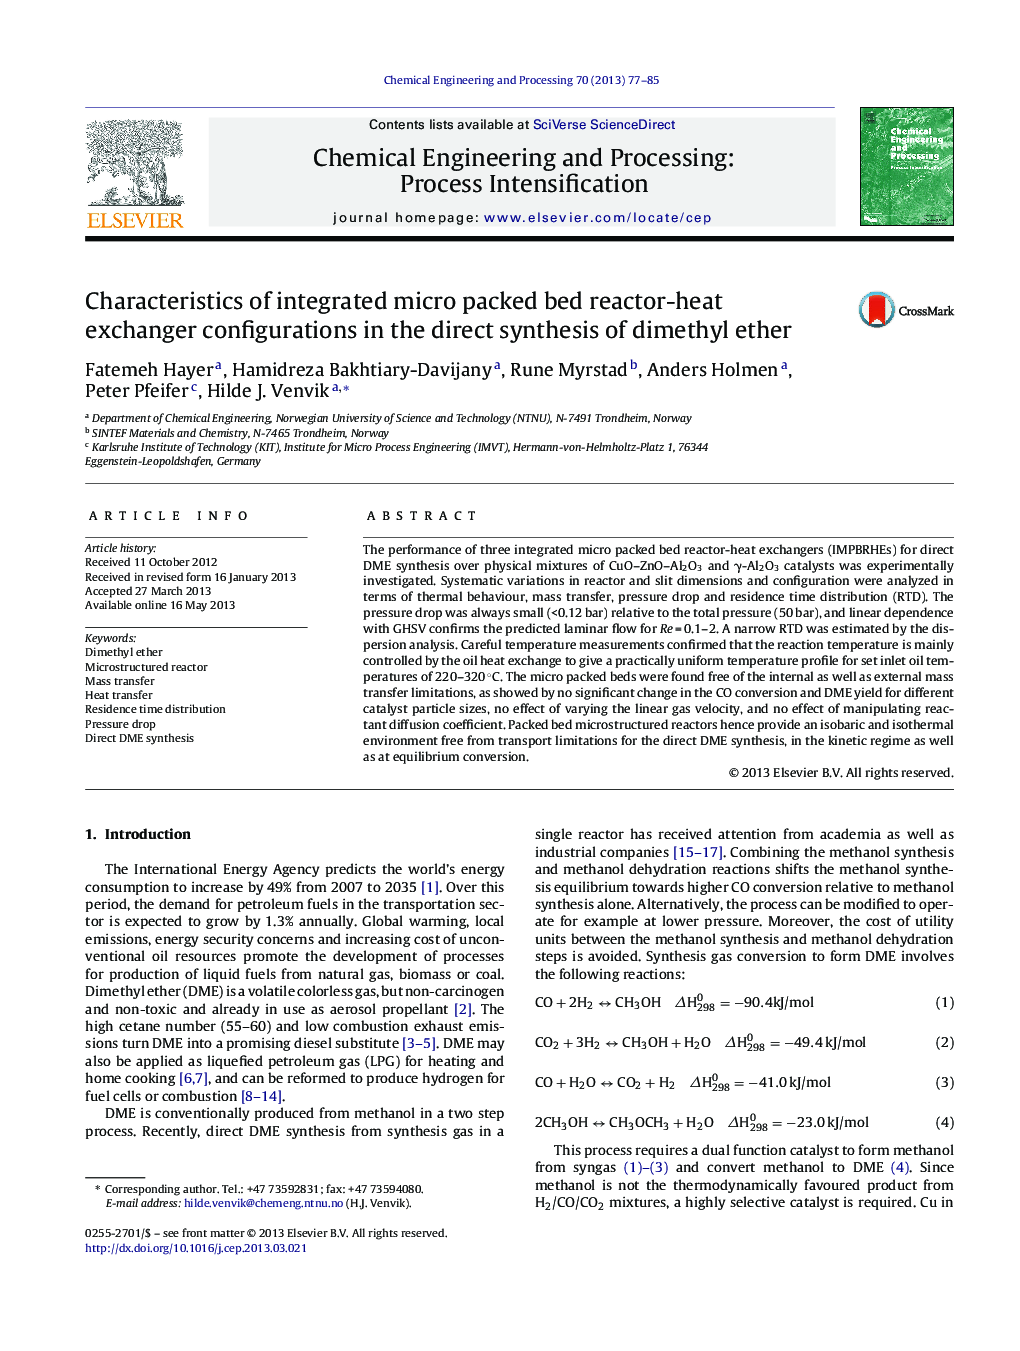 Characteristics of integrated micro packed bed reactor-heat exchanger configurations in the direct synthesis of dimethyl ether